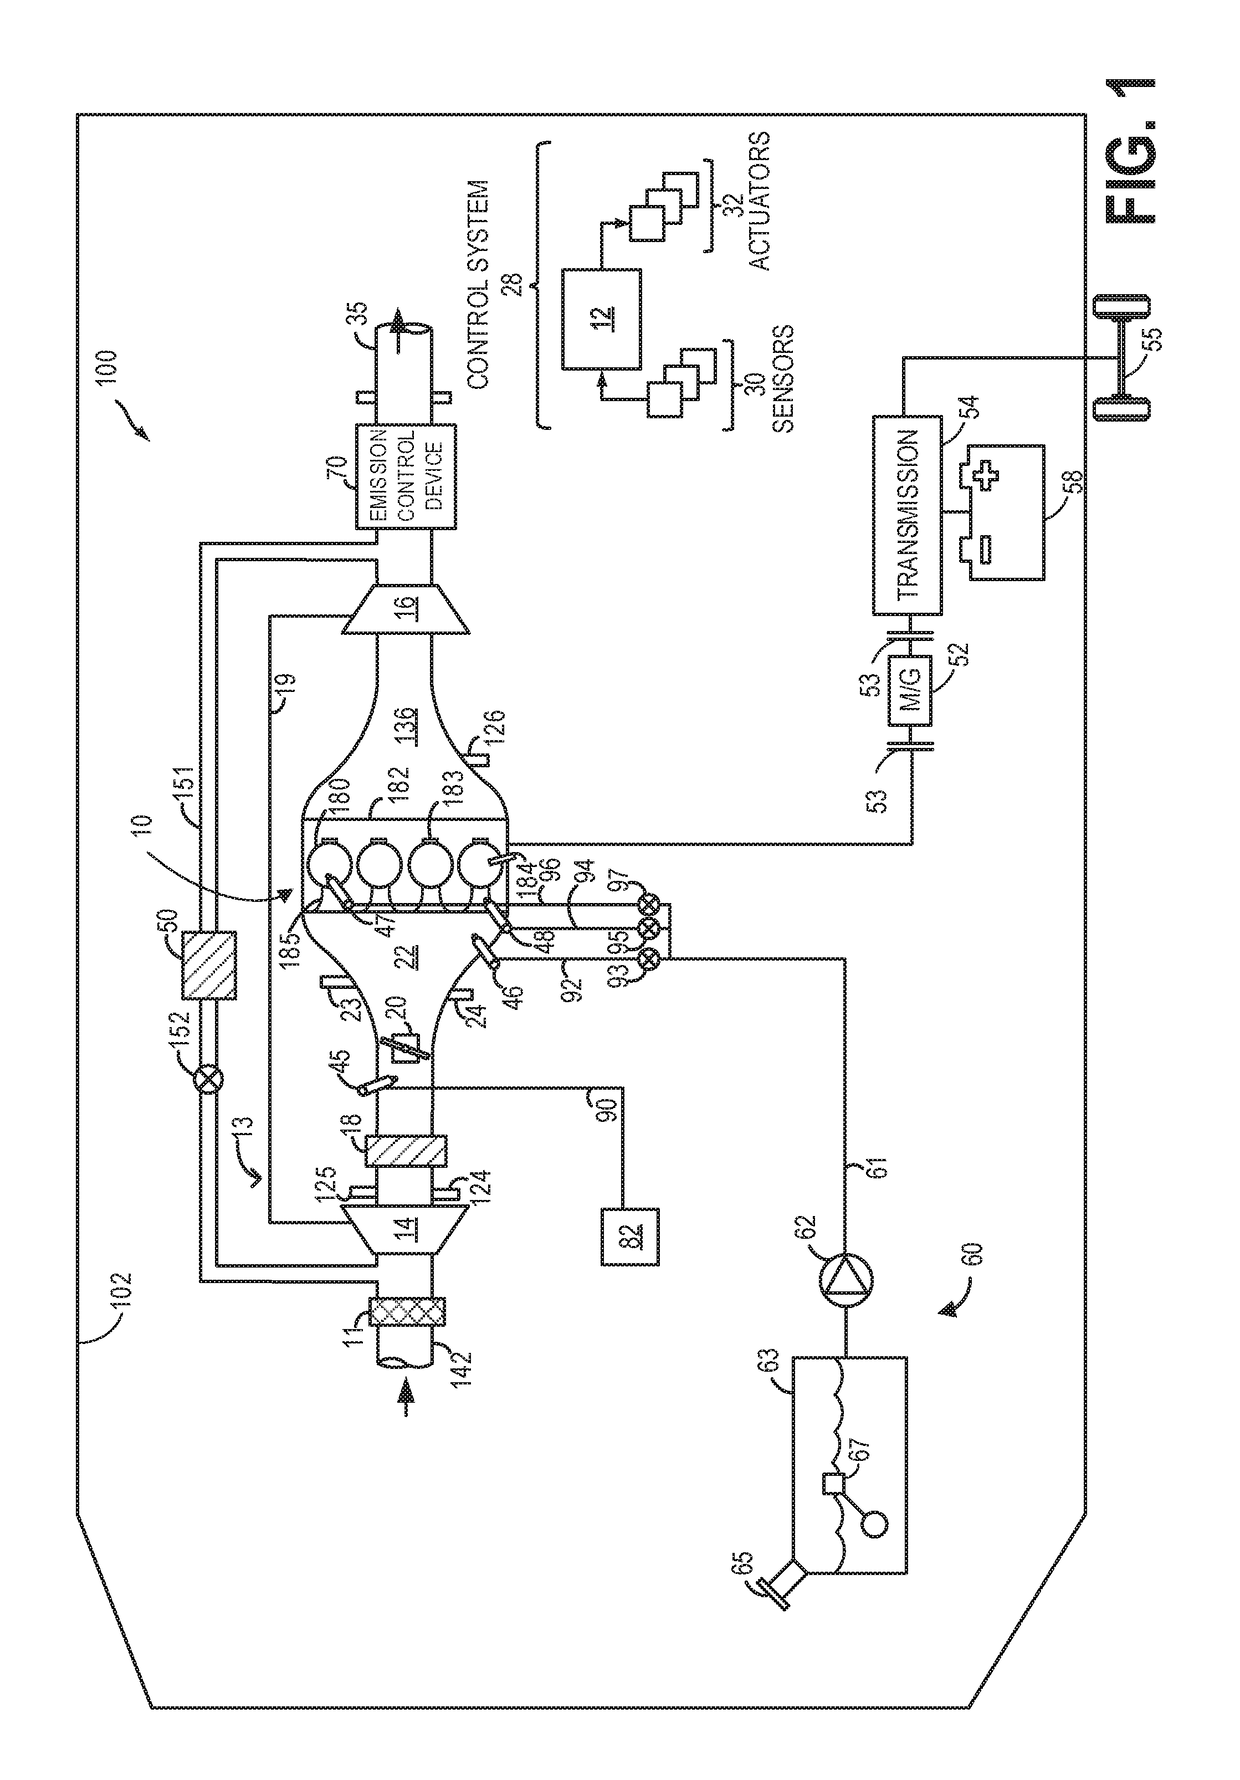 Methods and systems for central fuel injection